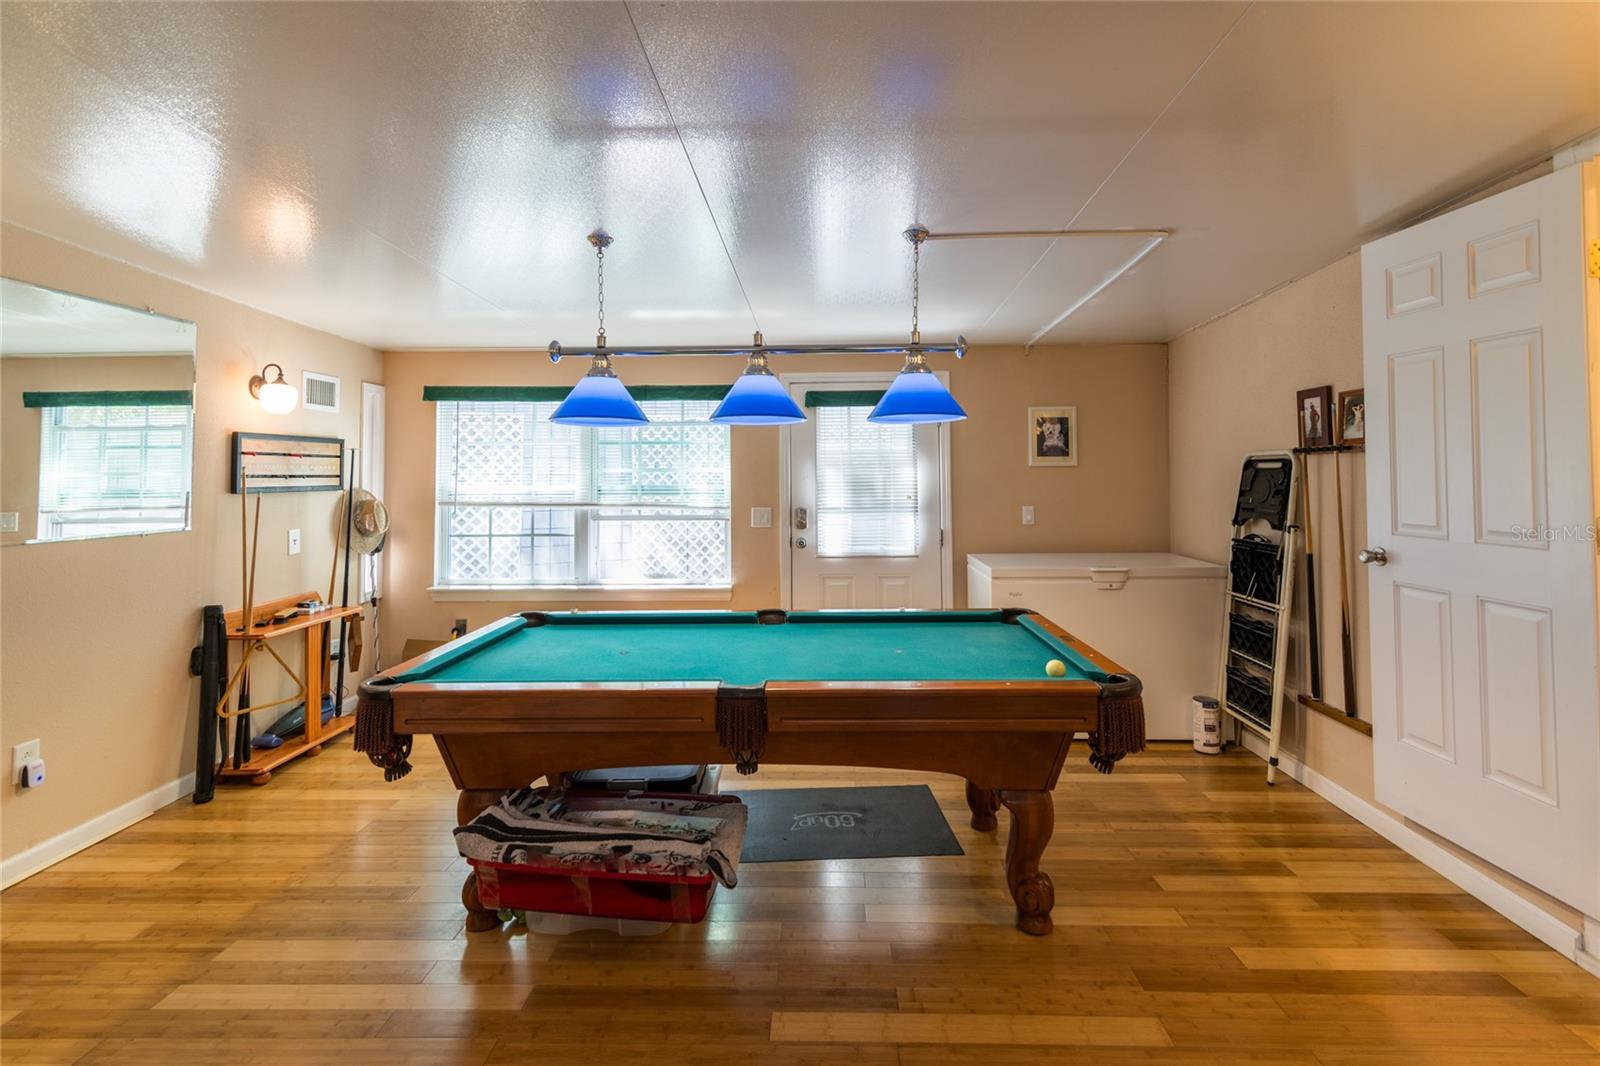 The additional "Fun Room" with pool table.